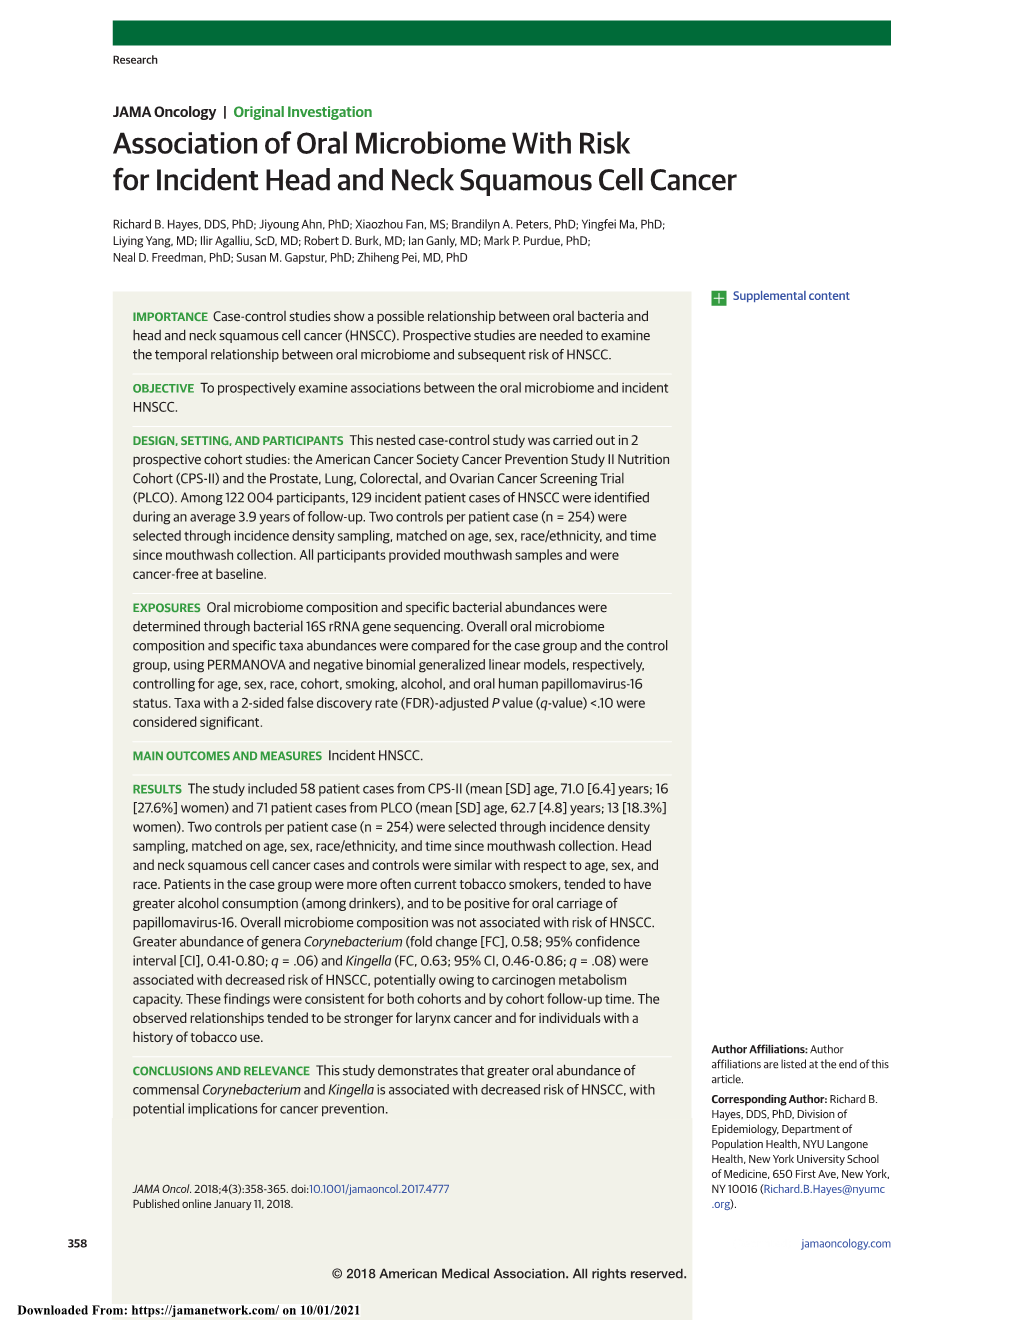 Association of Oral Microbiome with Risk for Incident Head and Neck Squamous Cell Cancer